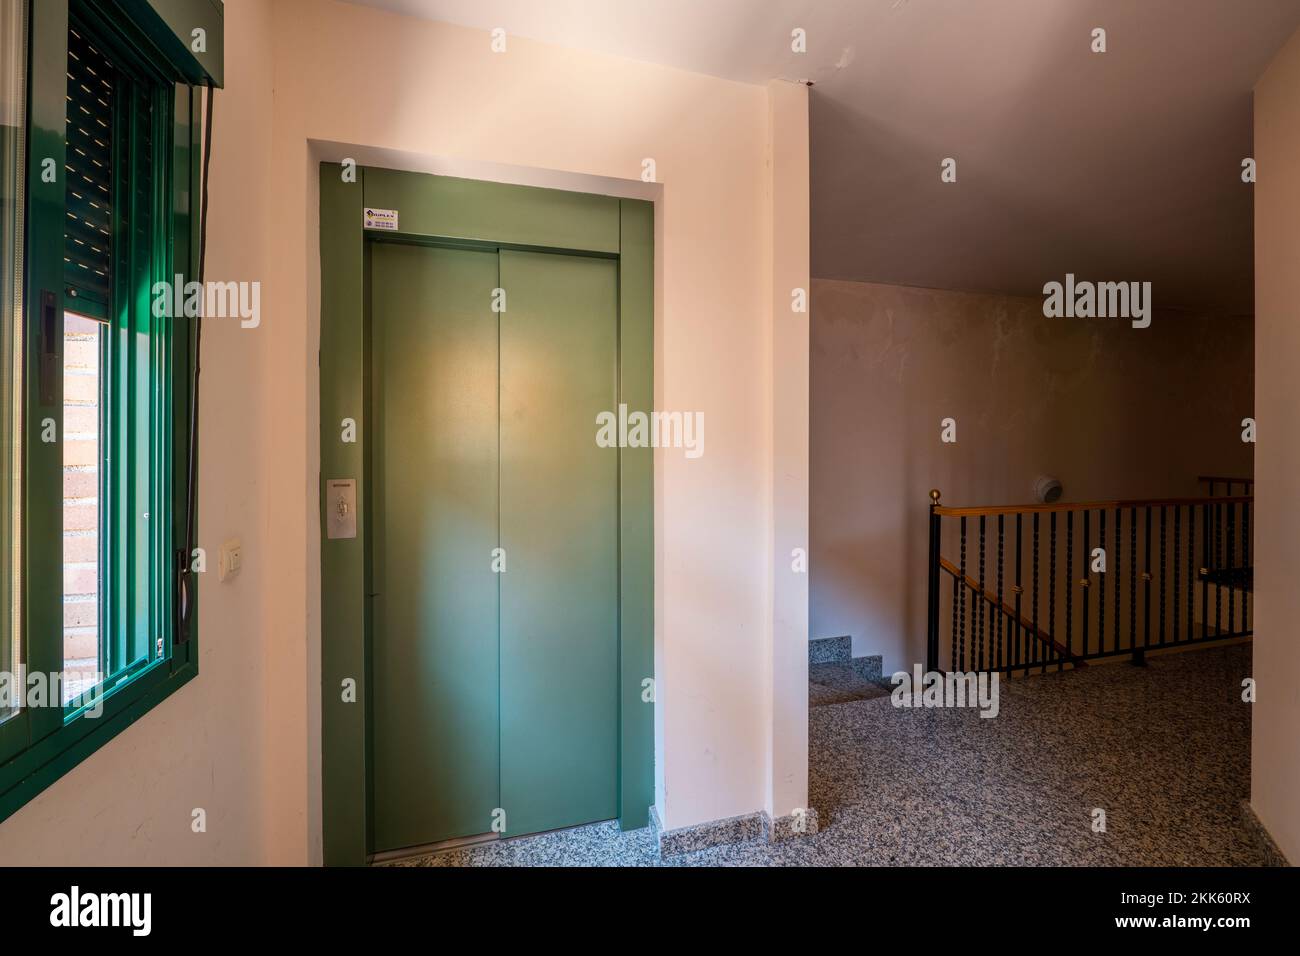 Landing of a residential apartment building with granite floors, black metal railing with wood and a green painted elevator Stock Photo